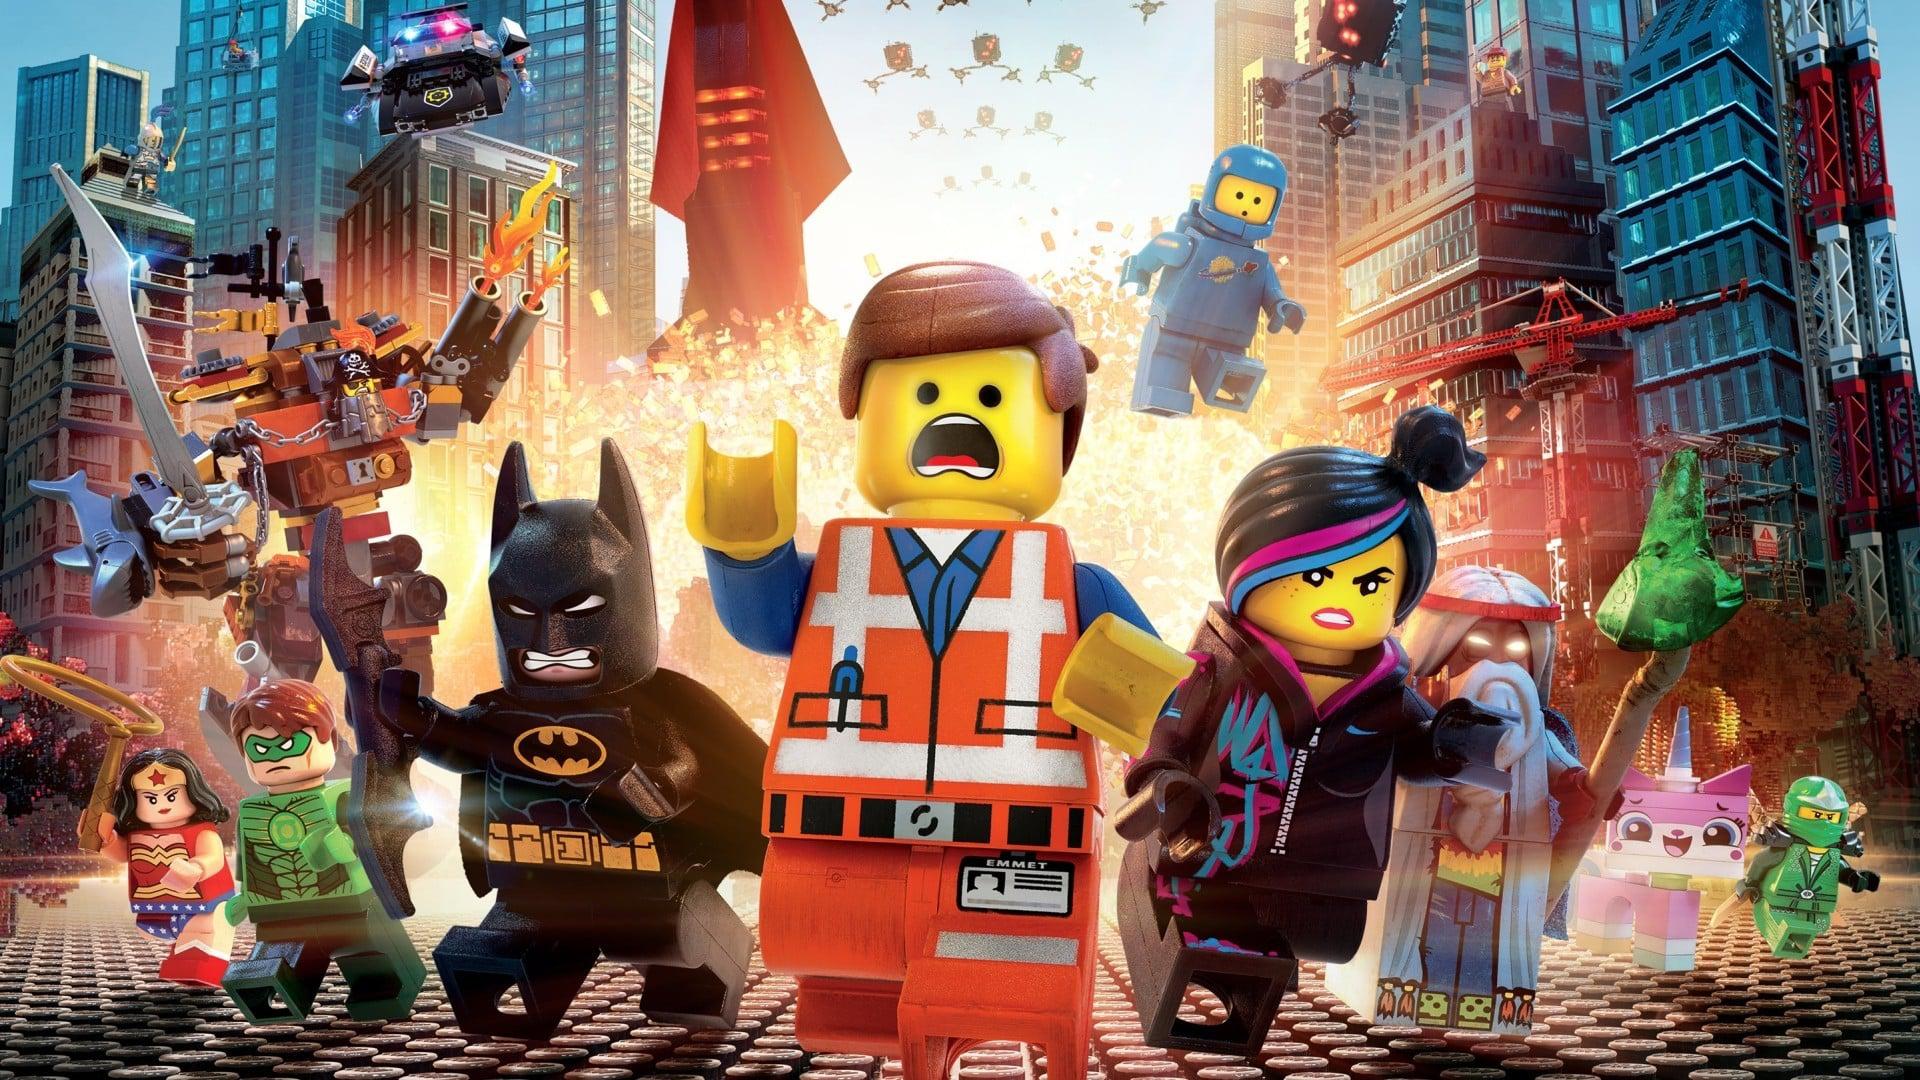 Backdrop Image for The Lego Movie